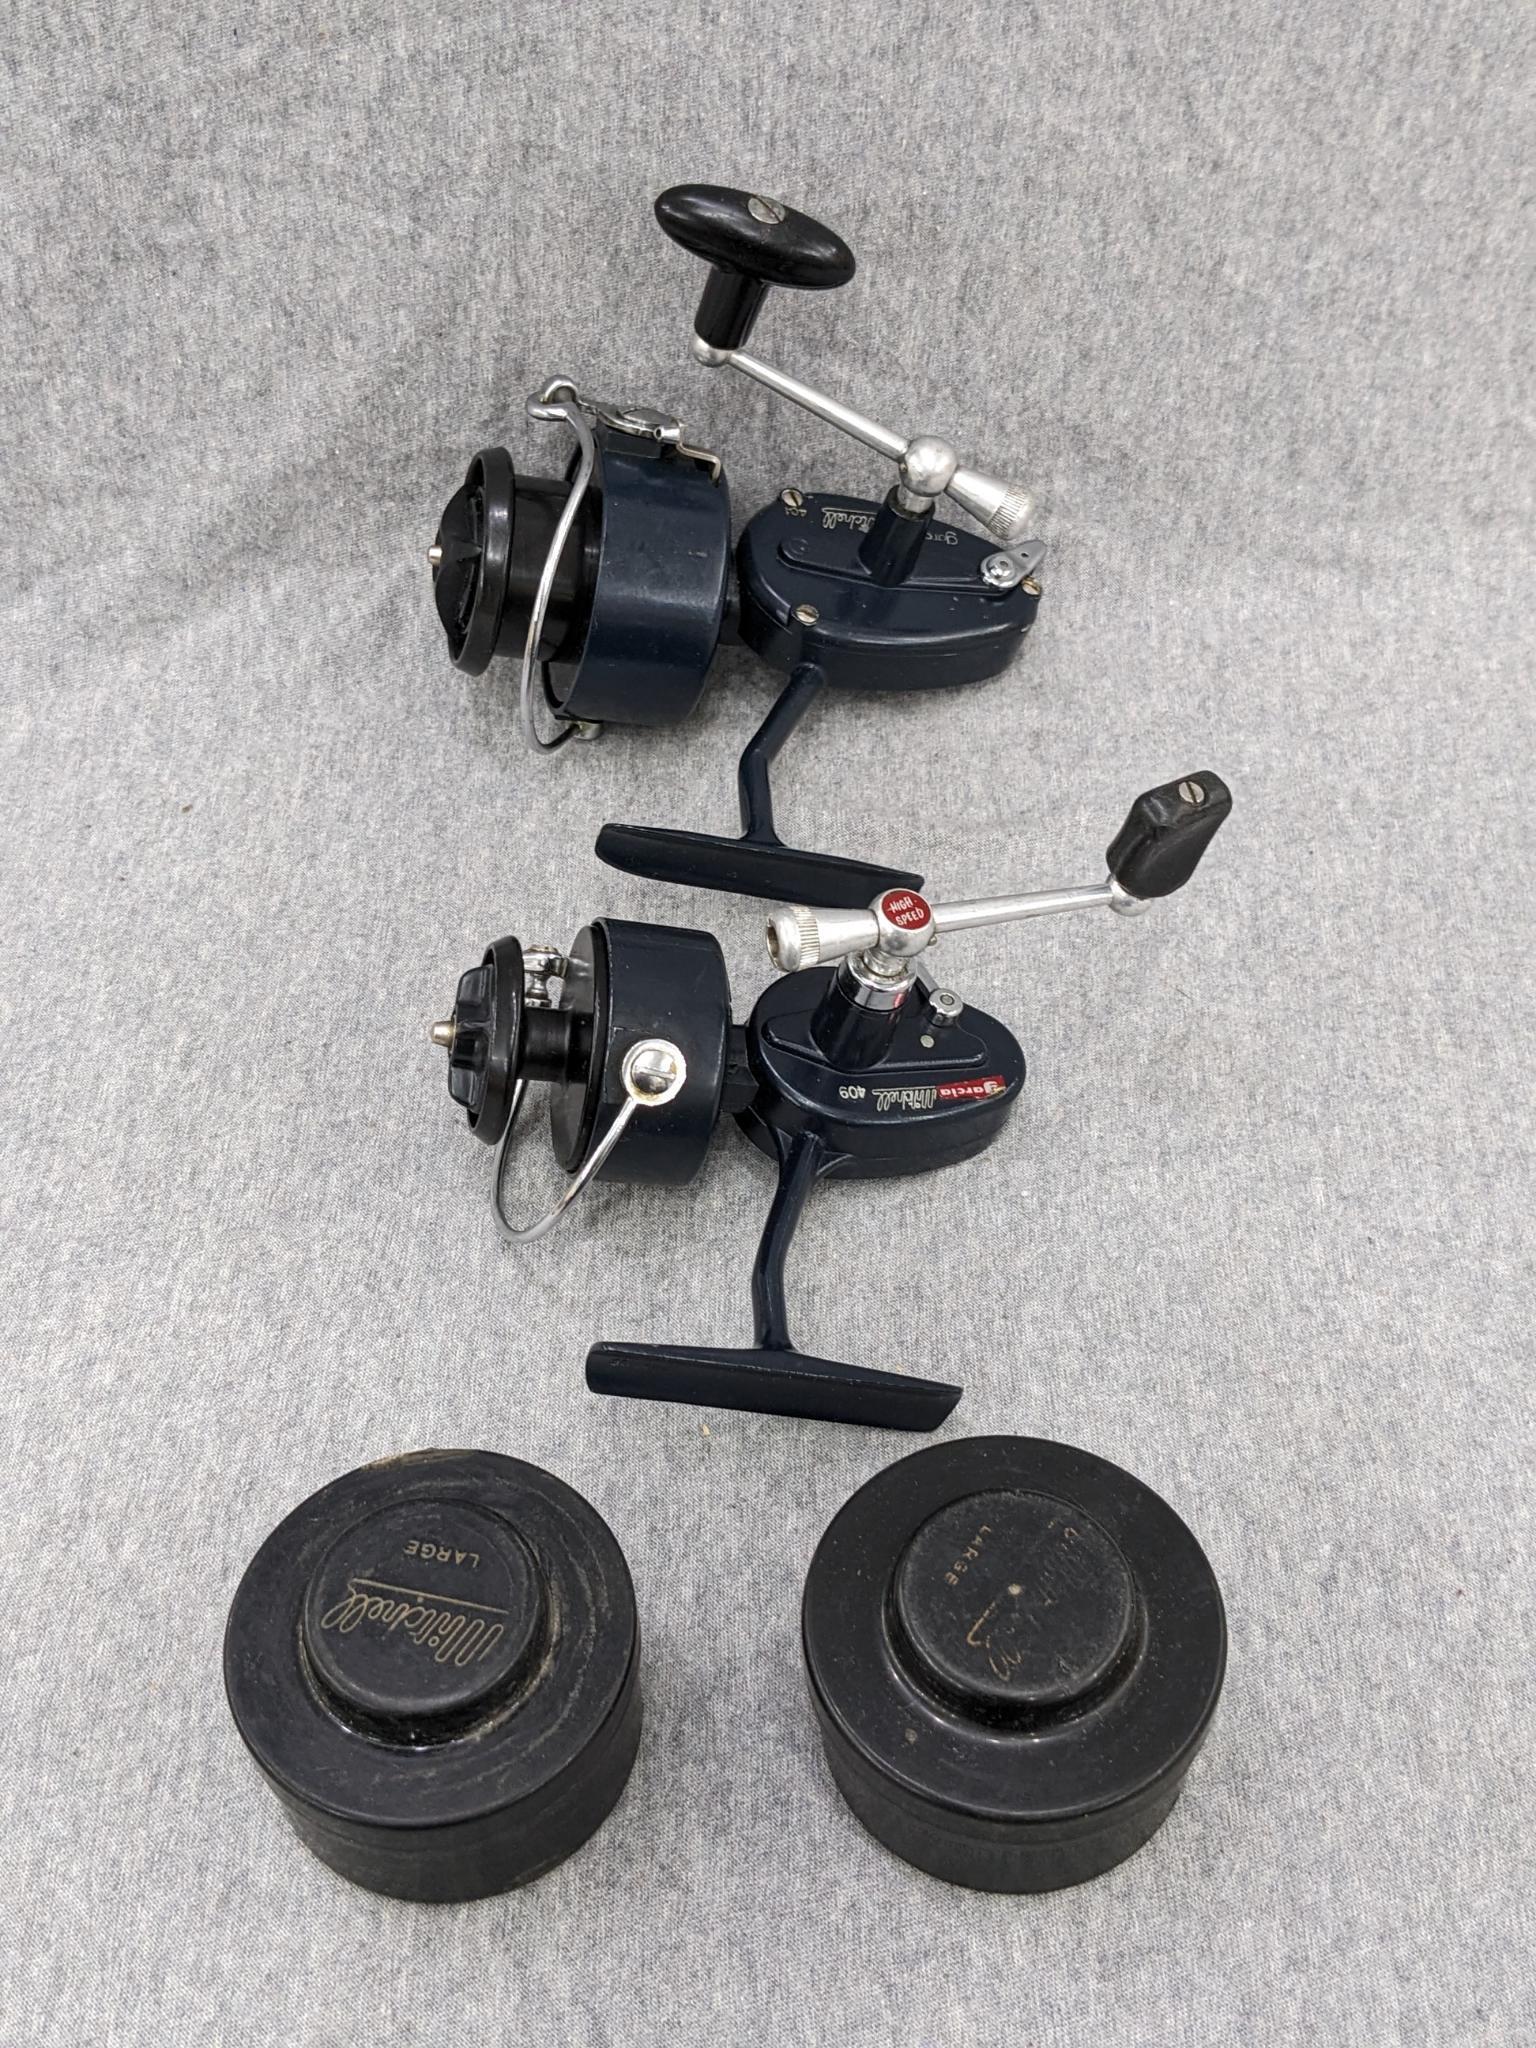 Sold at Auction: 2- VINTAGE MITCHELL 300 SPINNING REELS